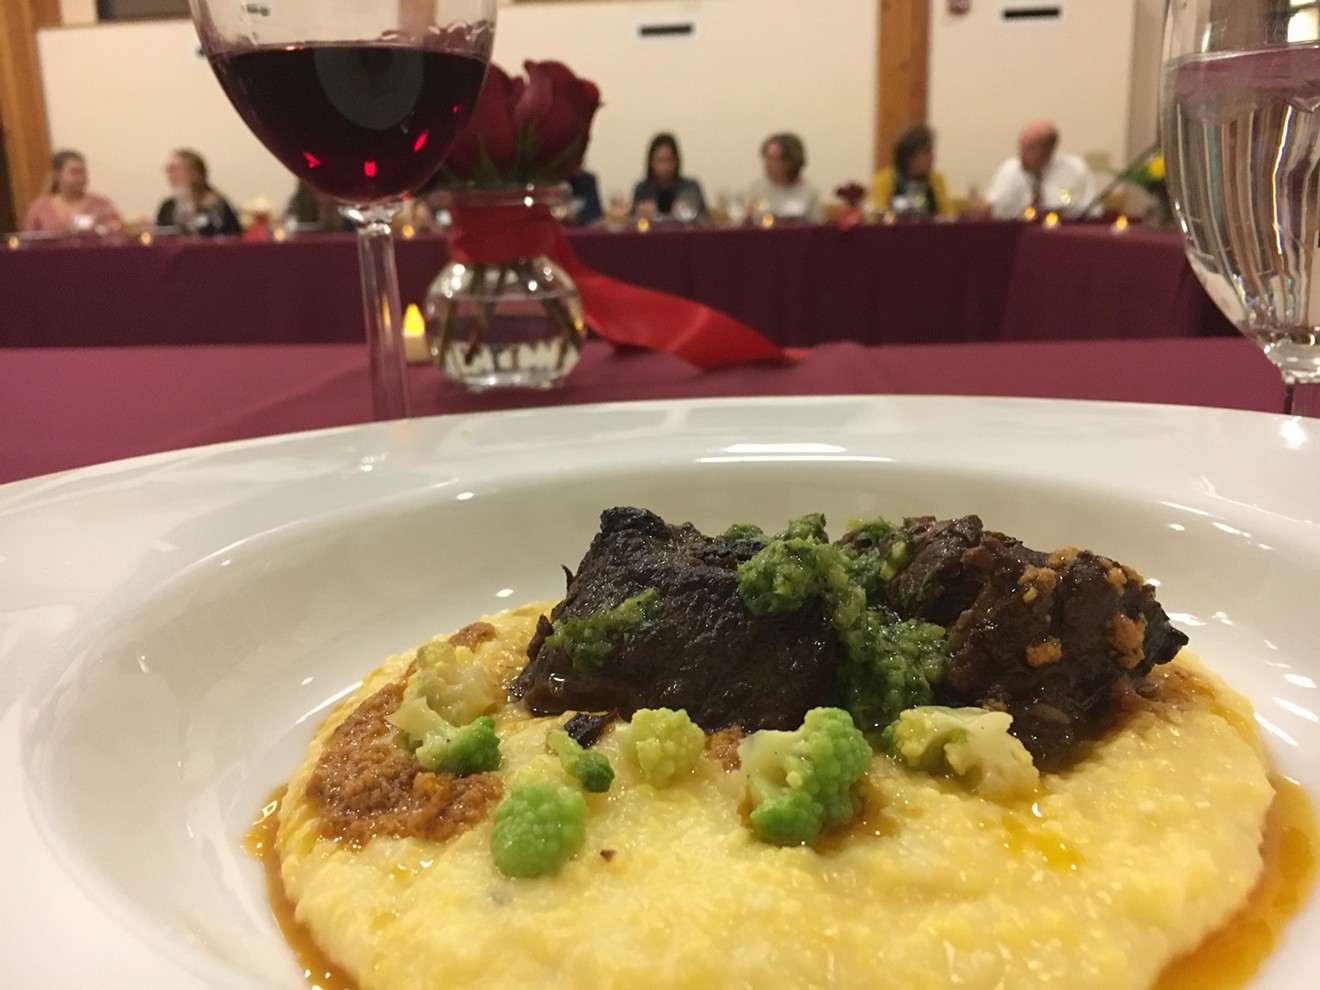 Persian flavors on Italian polenta at the University of Denver's recent Conflict Kitchen dinner.